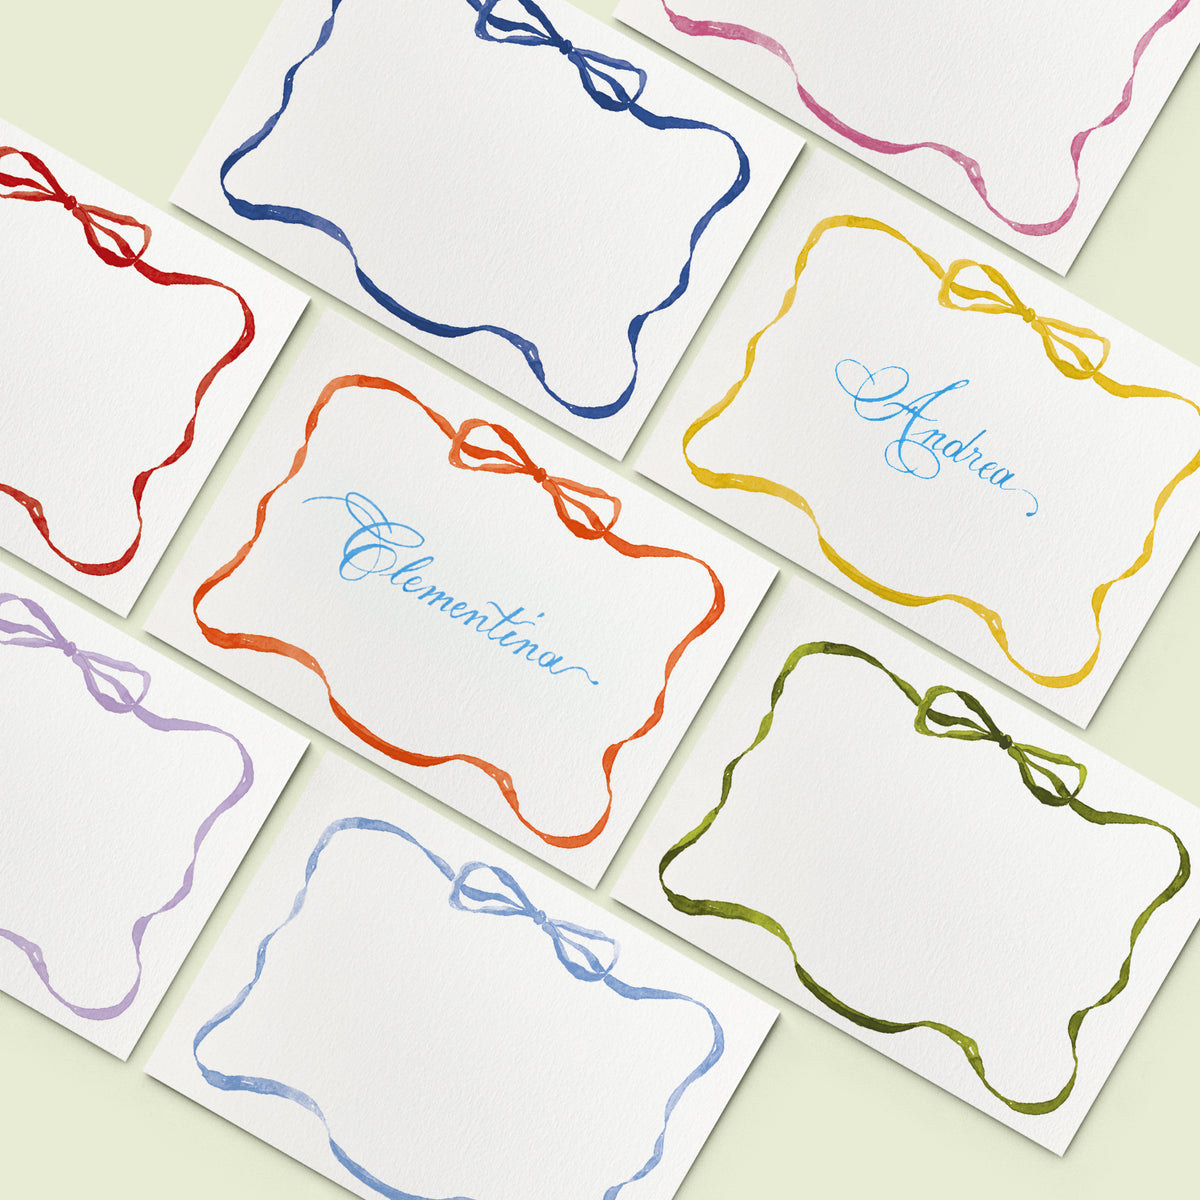 Rainbow Ribbon Place Cards, Set of 25